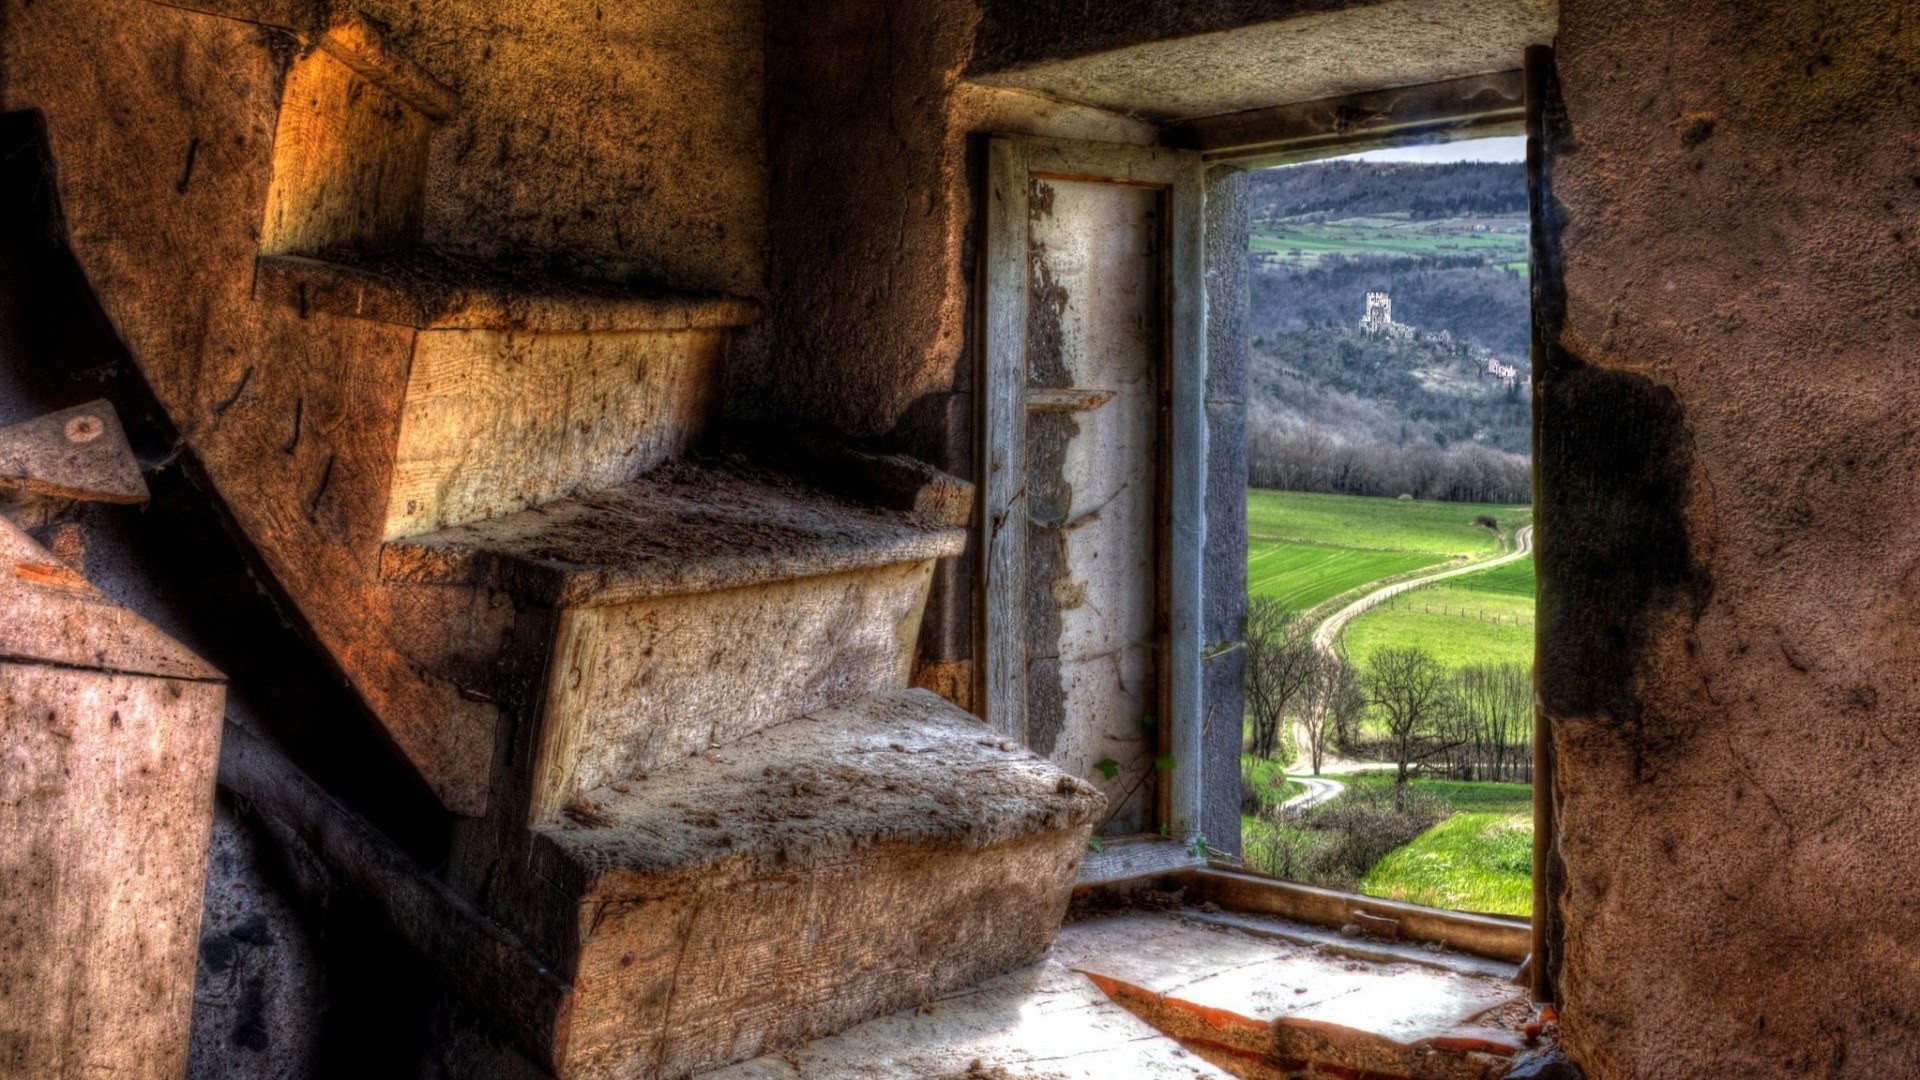 architecture, Abandoned, Interior, Room, HDR, Stairs, Window, Landscape, Nature, Dirt Road, Trees, Tower, Walls, Hills Wallpaper